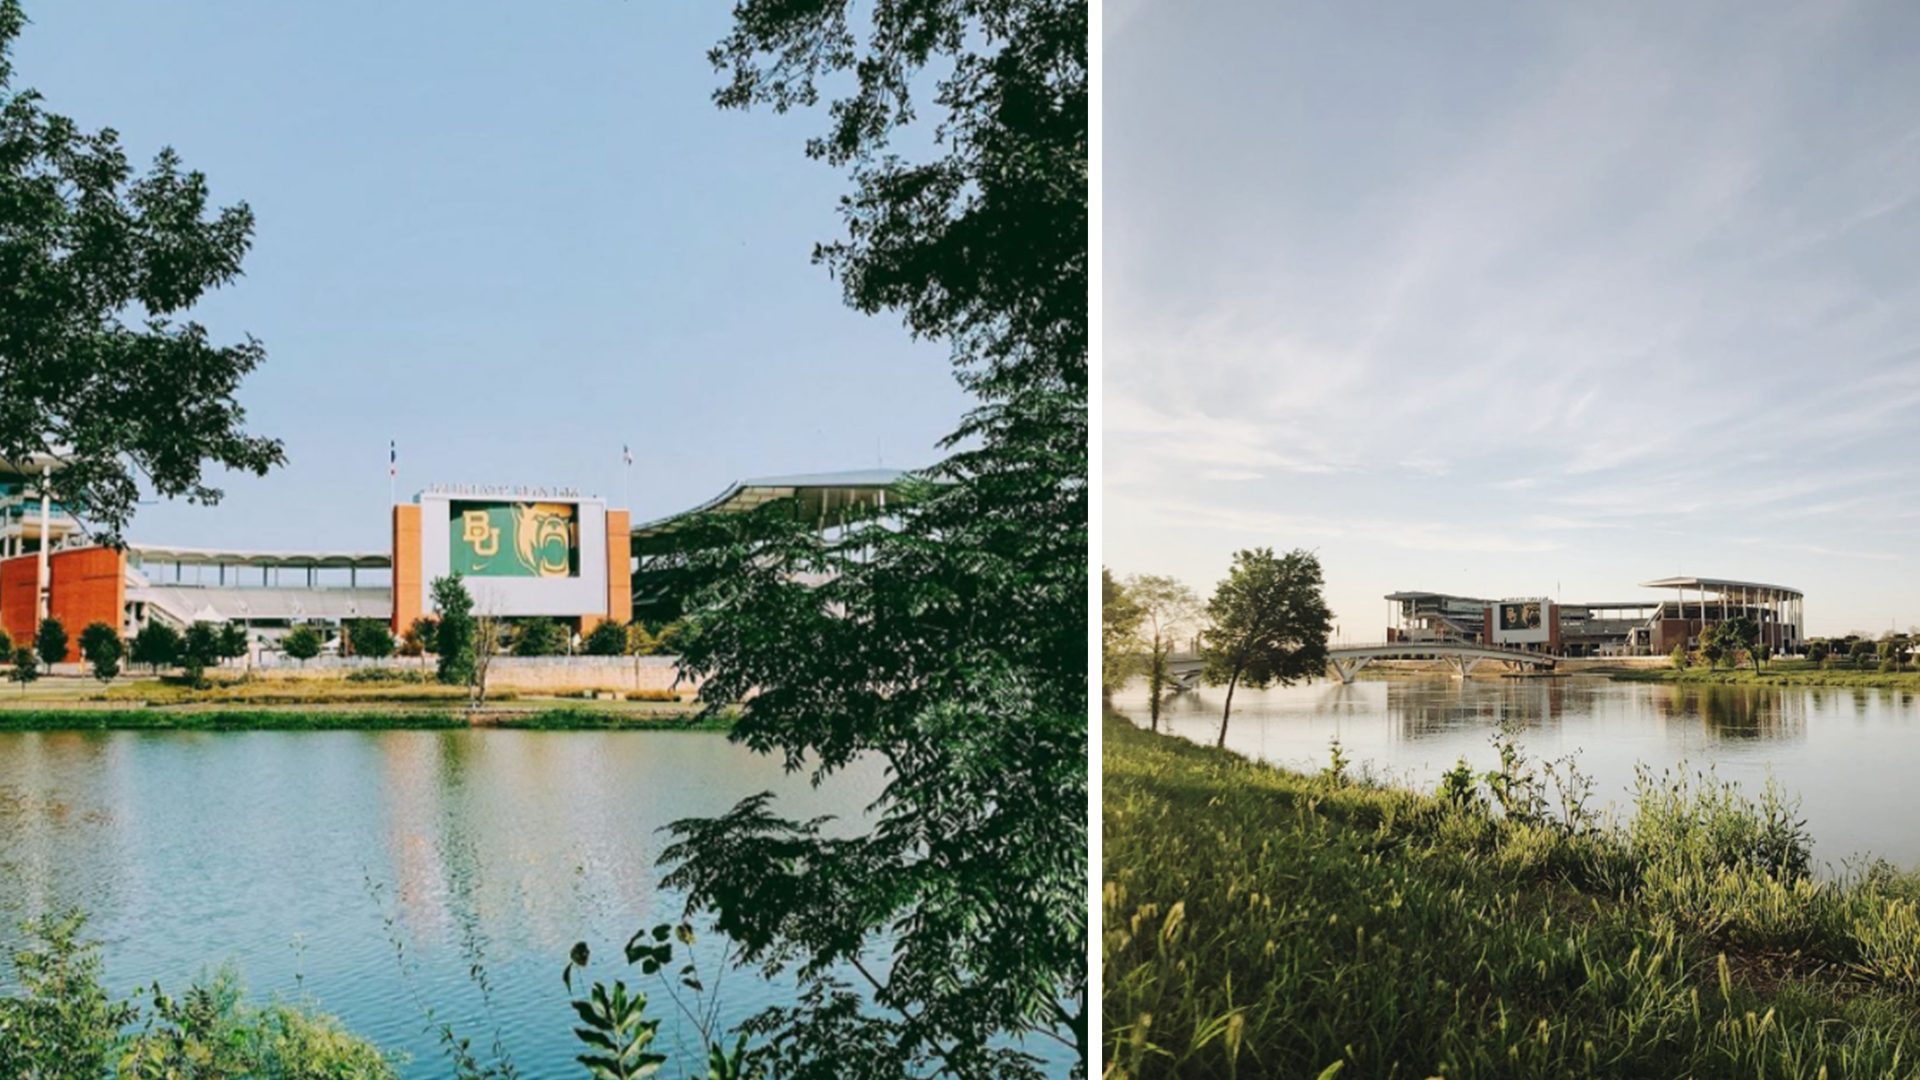 McLane Stadium as seen from across the Brazos River